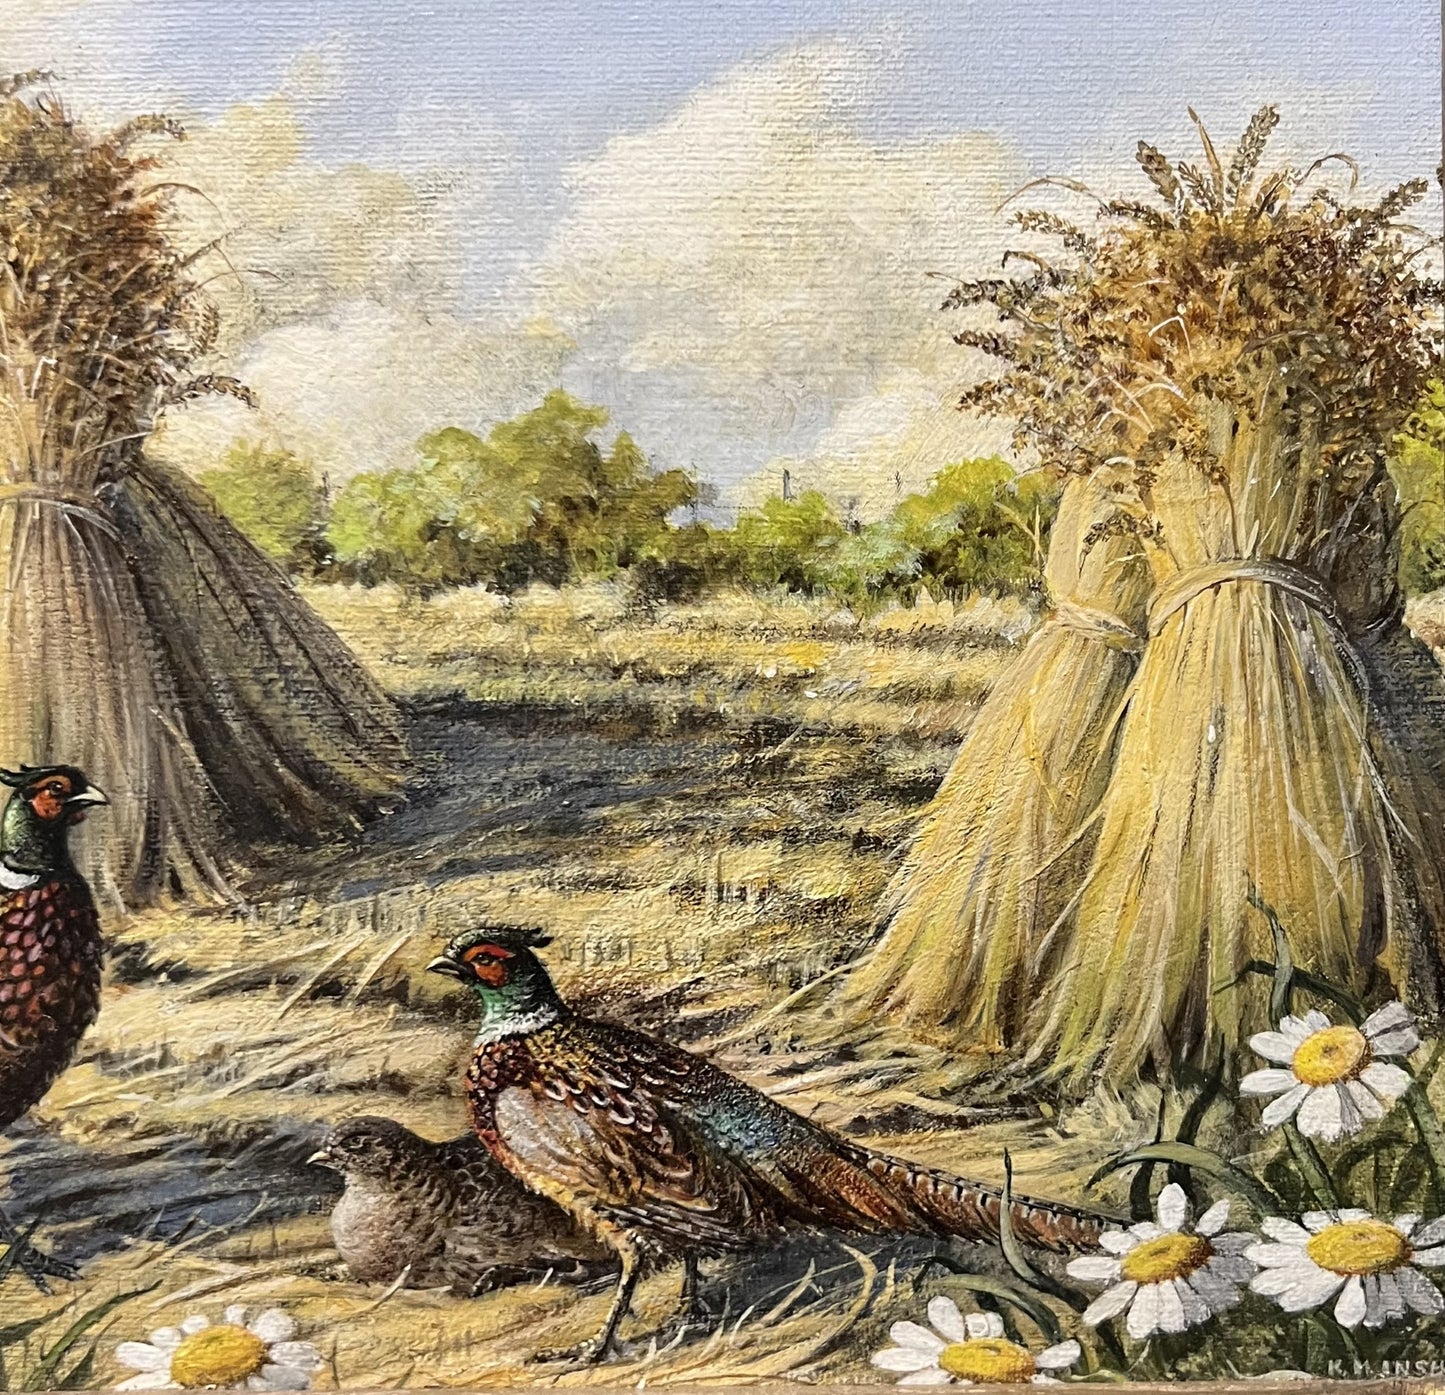 C1970s Oil on Canvas “Pheasant in Field”